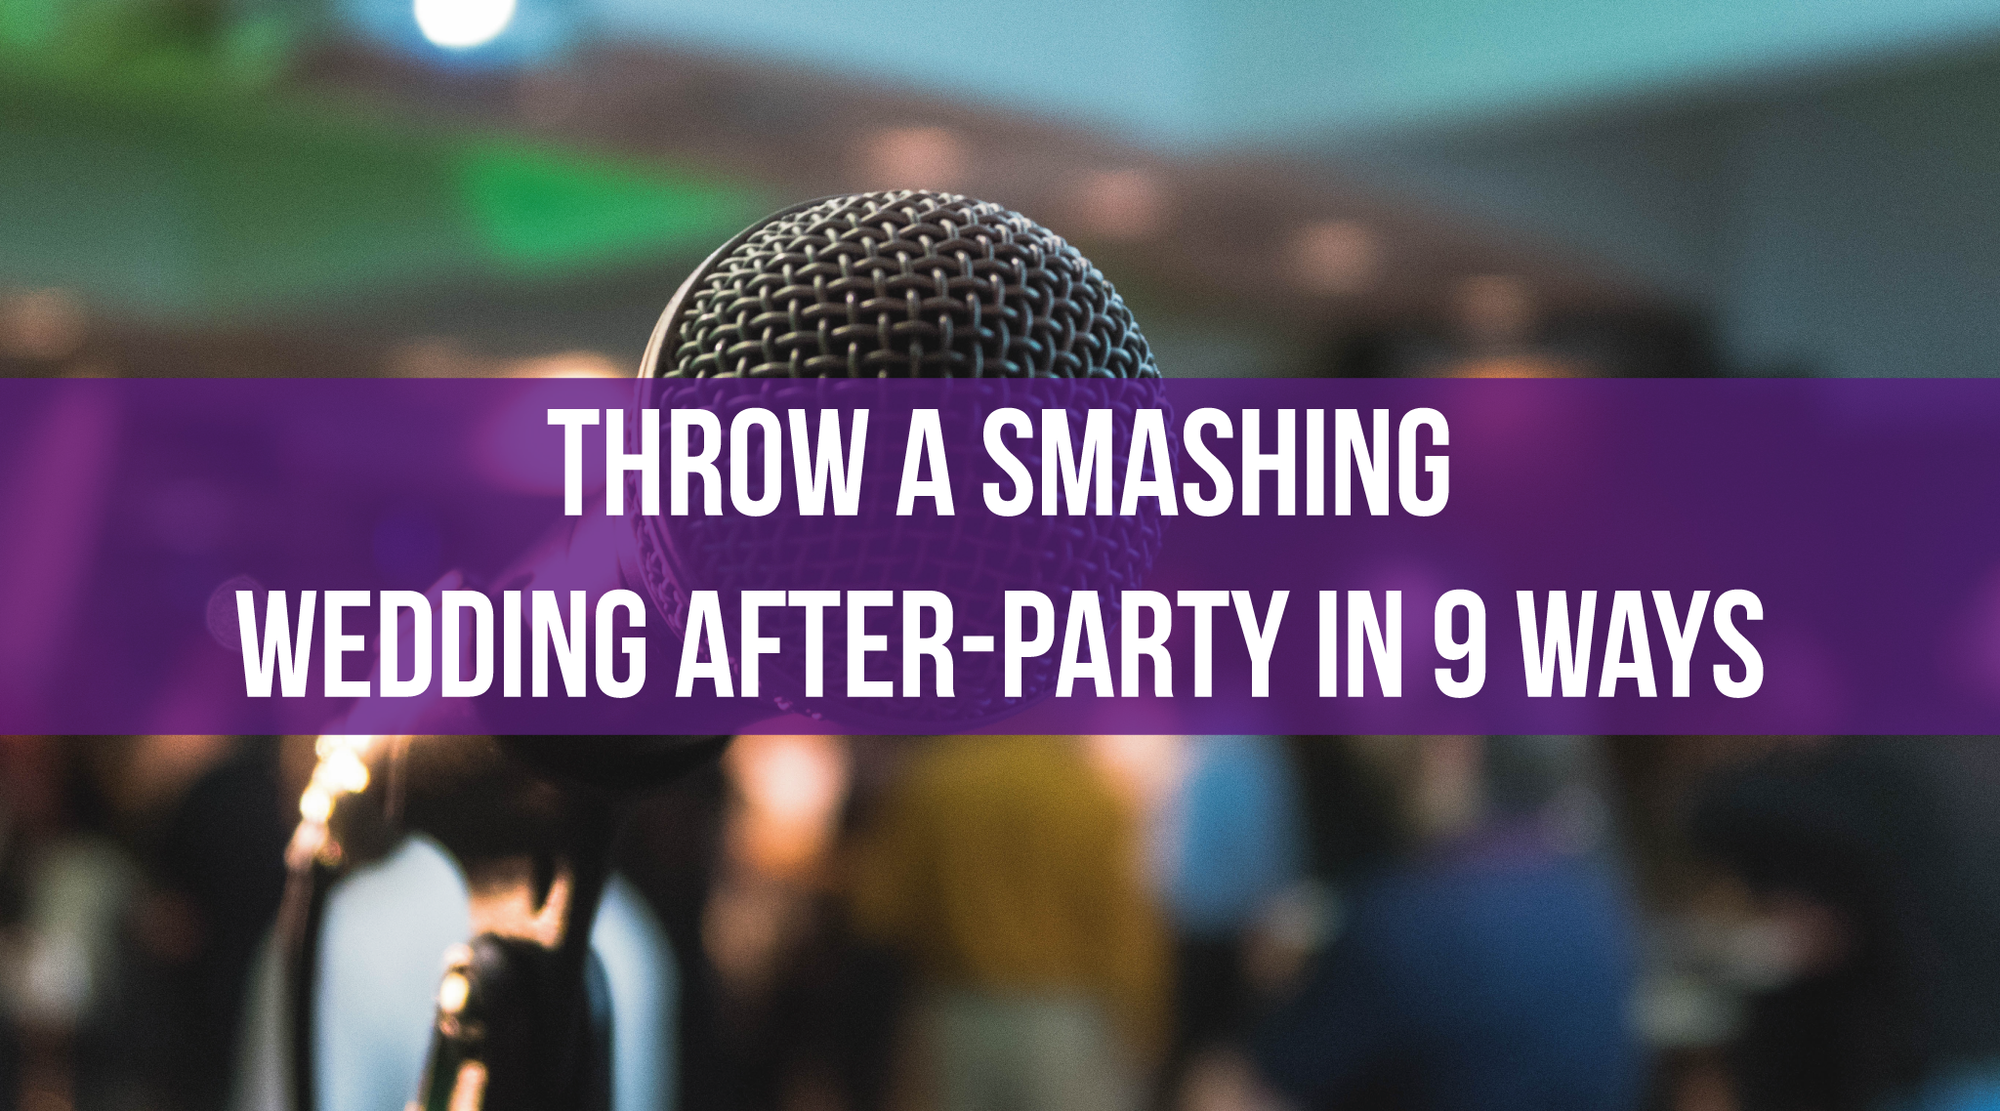 Throw a Smashing Wedding After-Party in 9 Ways